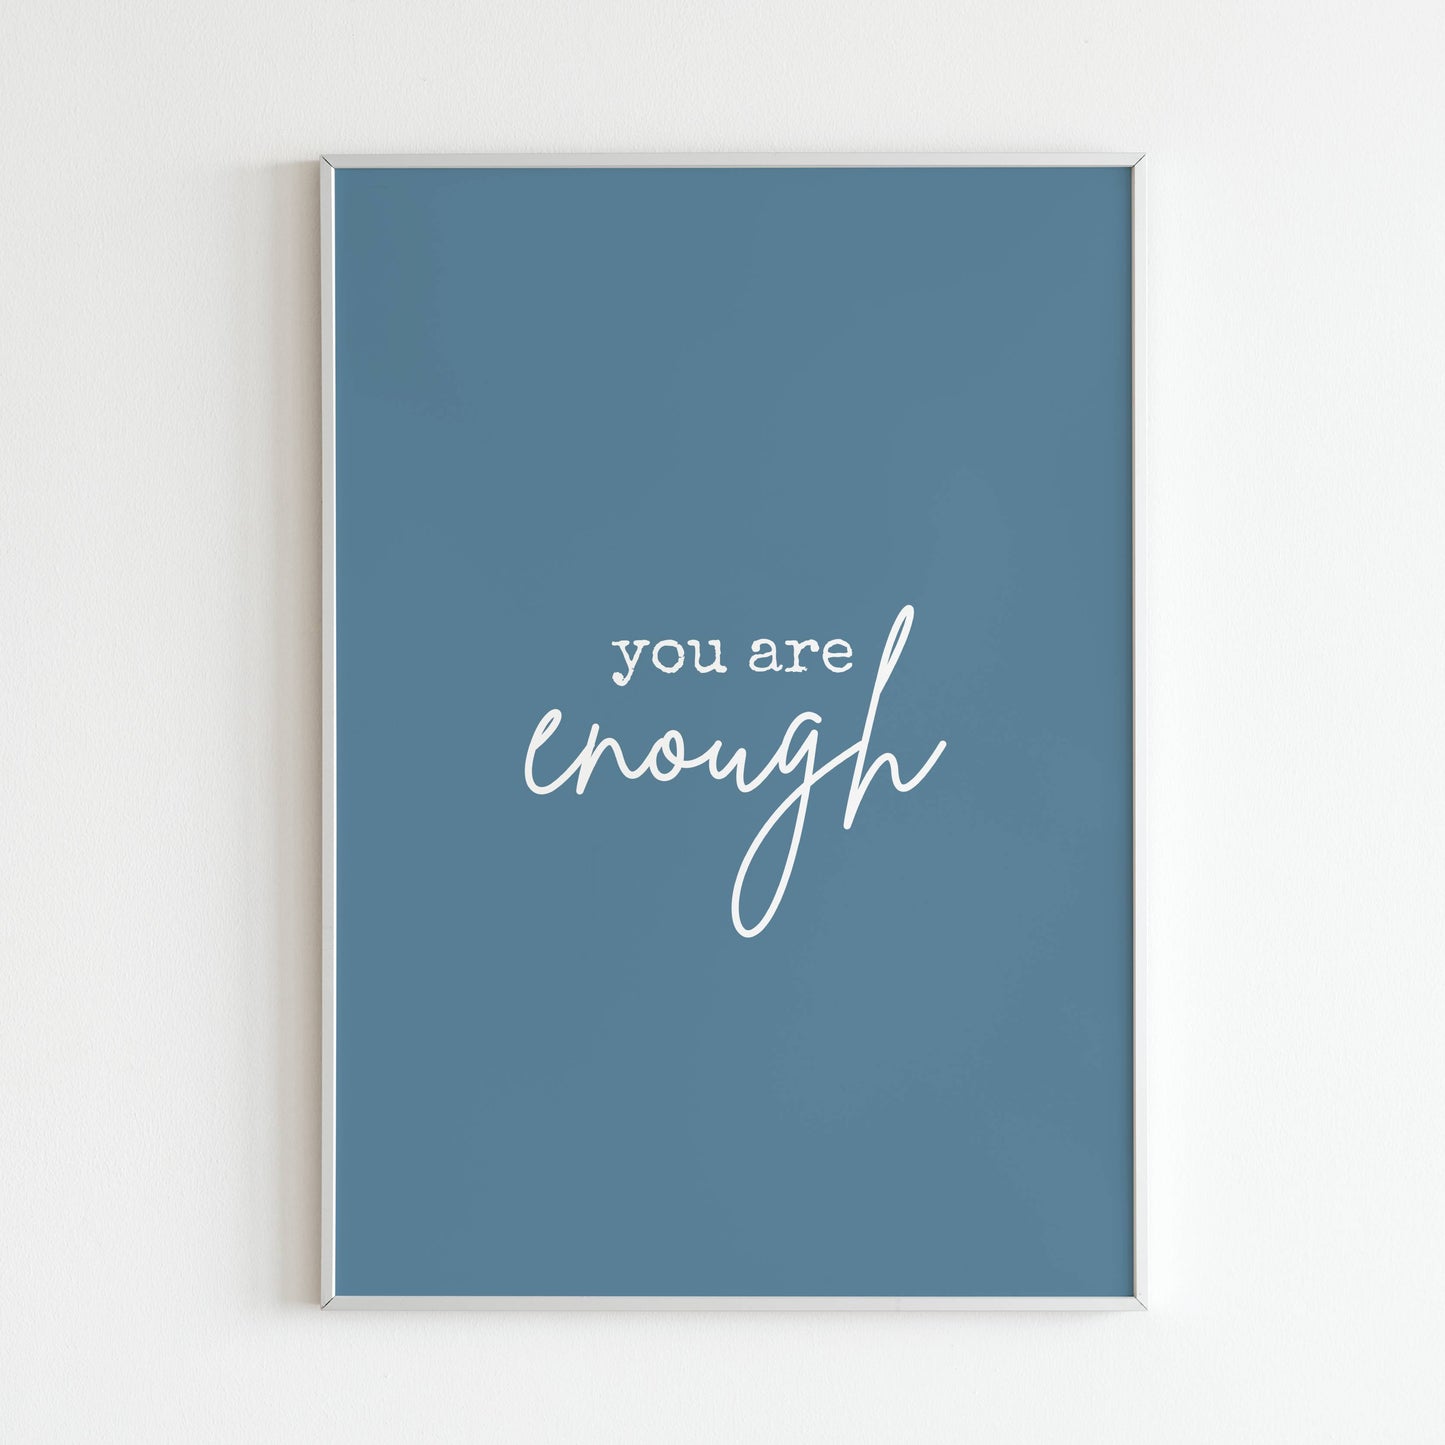 You are enough - Printed Wall Art / Poster. This beautiful poster adds a touch of sophistication to your space. Arrives ready to hang.